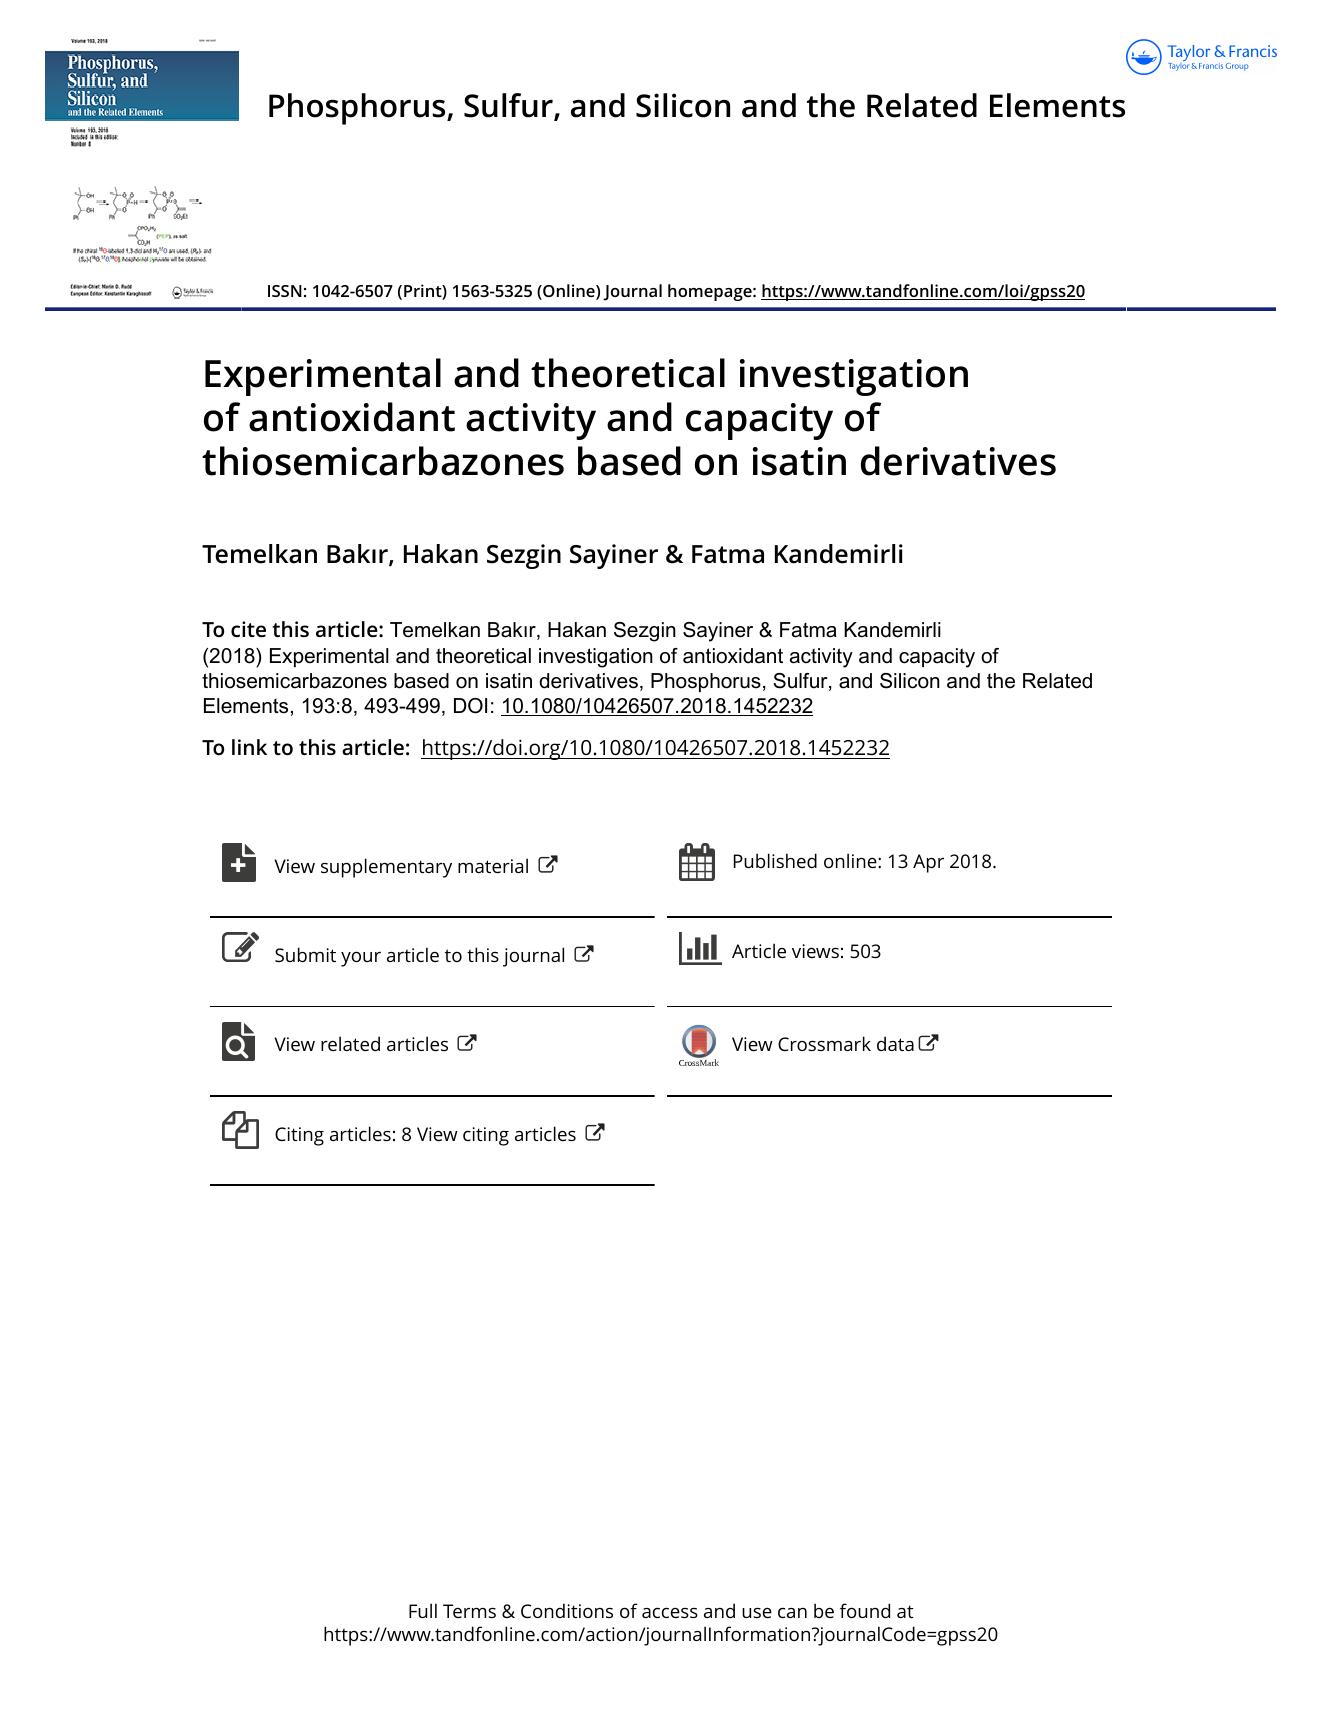 Experimental and theoretical investigation of antioxidant activity and capacity of thiosemicarbazones based on isatin derivatives by Temelkan Bakr & Hakan Sezgin Sayiner & Fatma Kandemirli